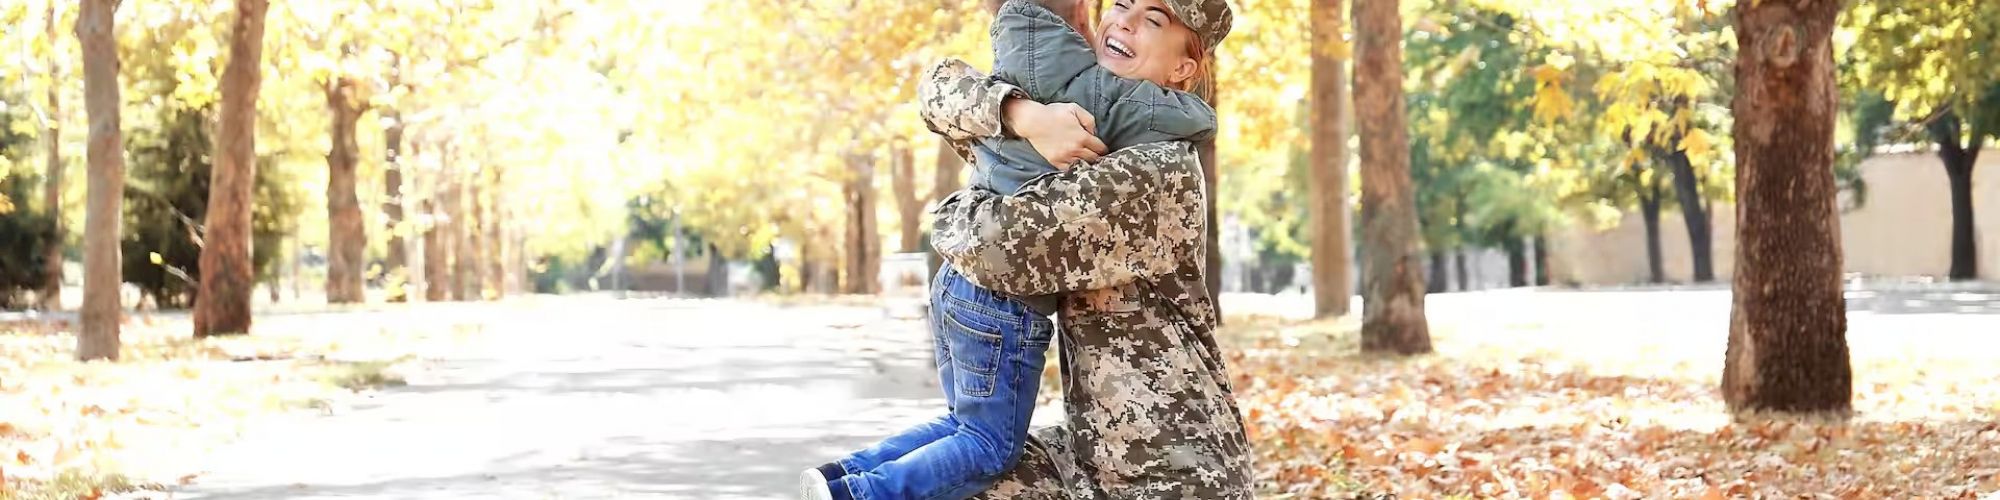 A person in military uniform hugs a child in an outdoor park, surrounded by trees and fallen autumn leaves.